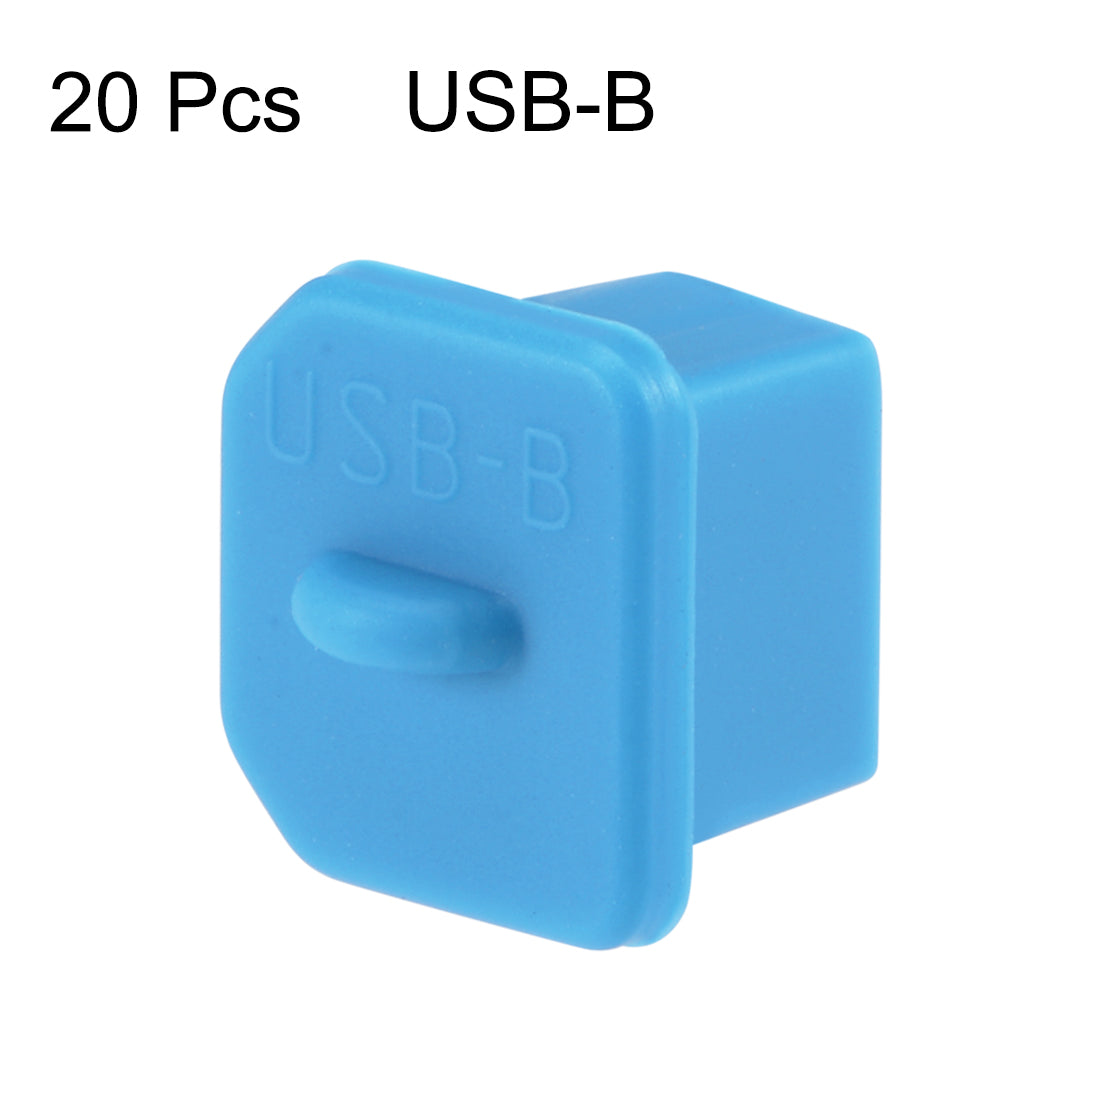 uxcell Uxcell 20pcs Silicone USB B Port Protectors Anti-Dust Stopper Cap Cover, Blue